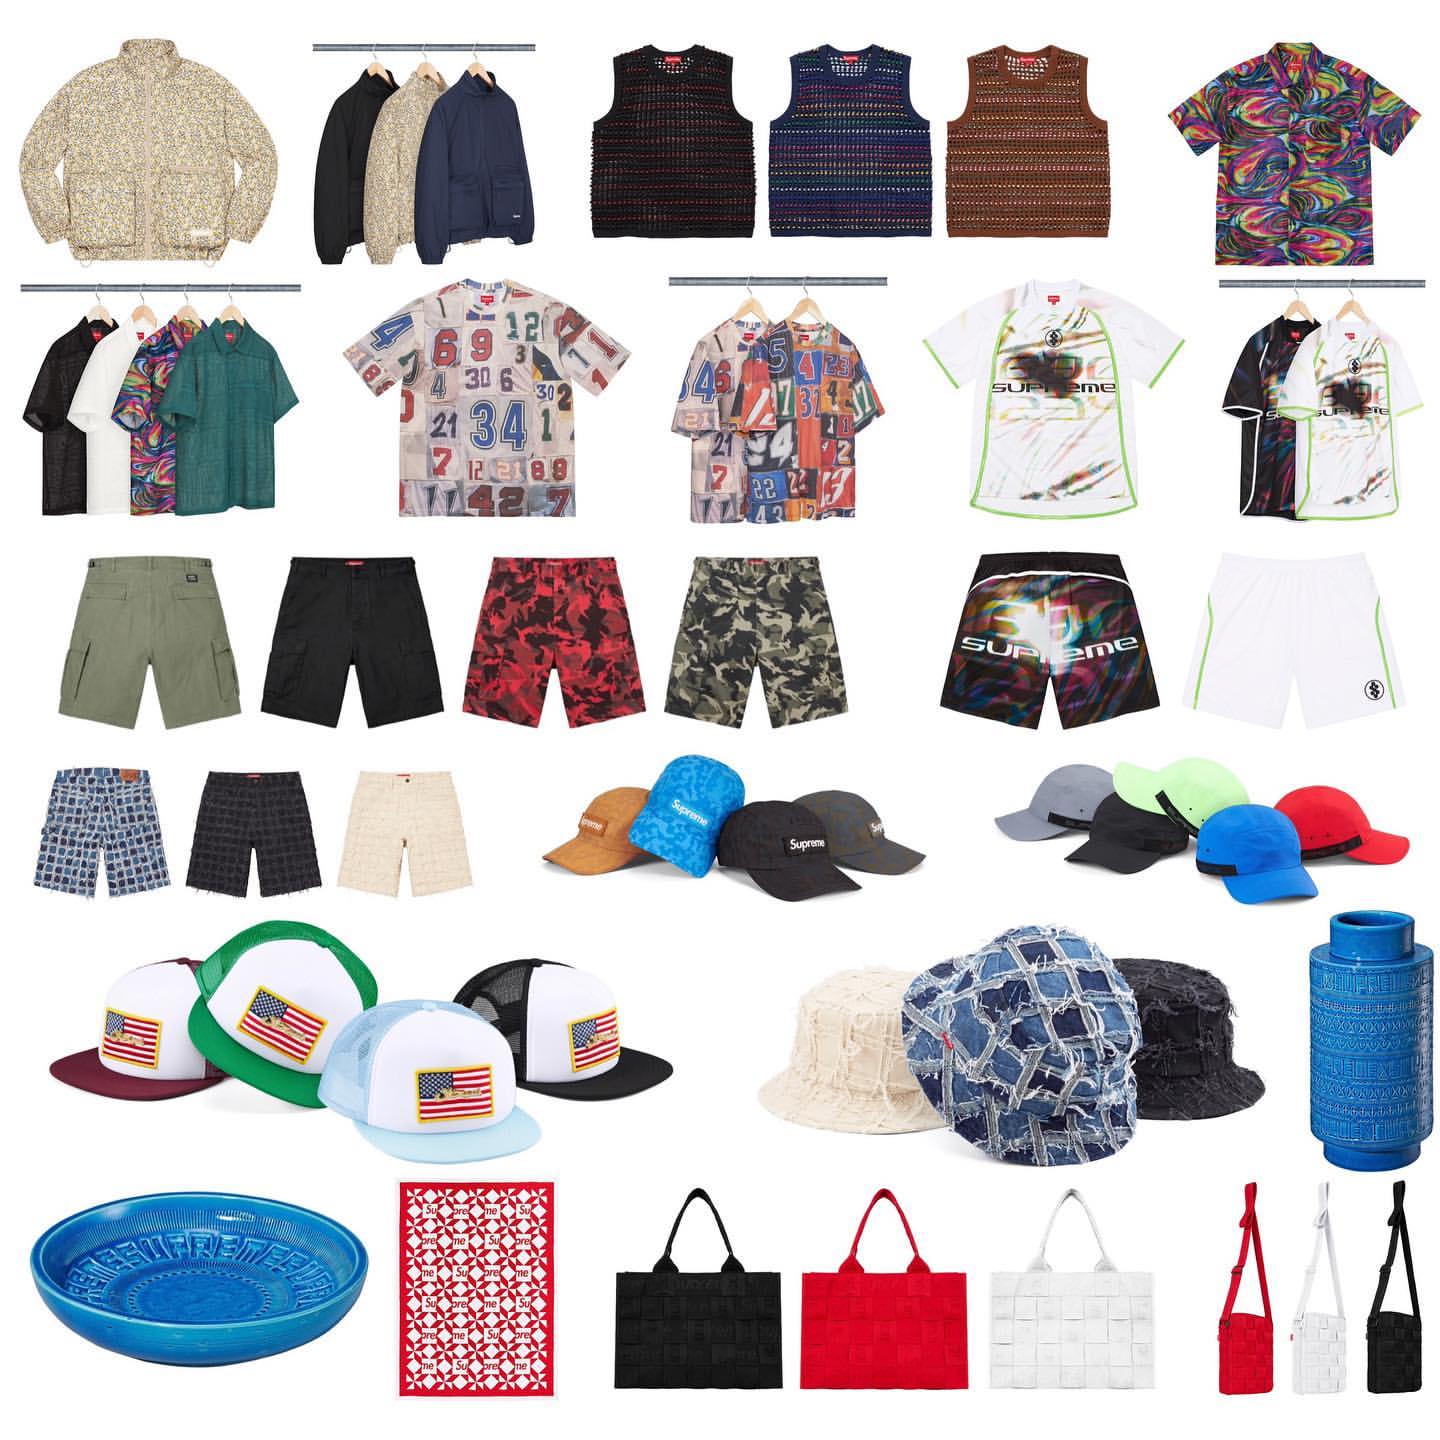 supreme-online-store-20230610-week16-23ss-release-items